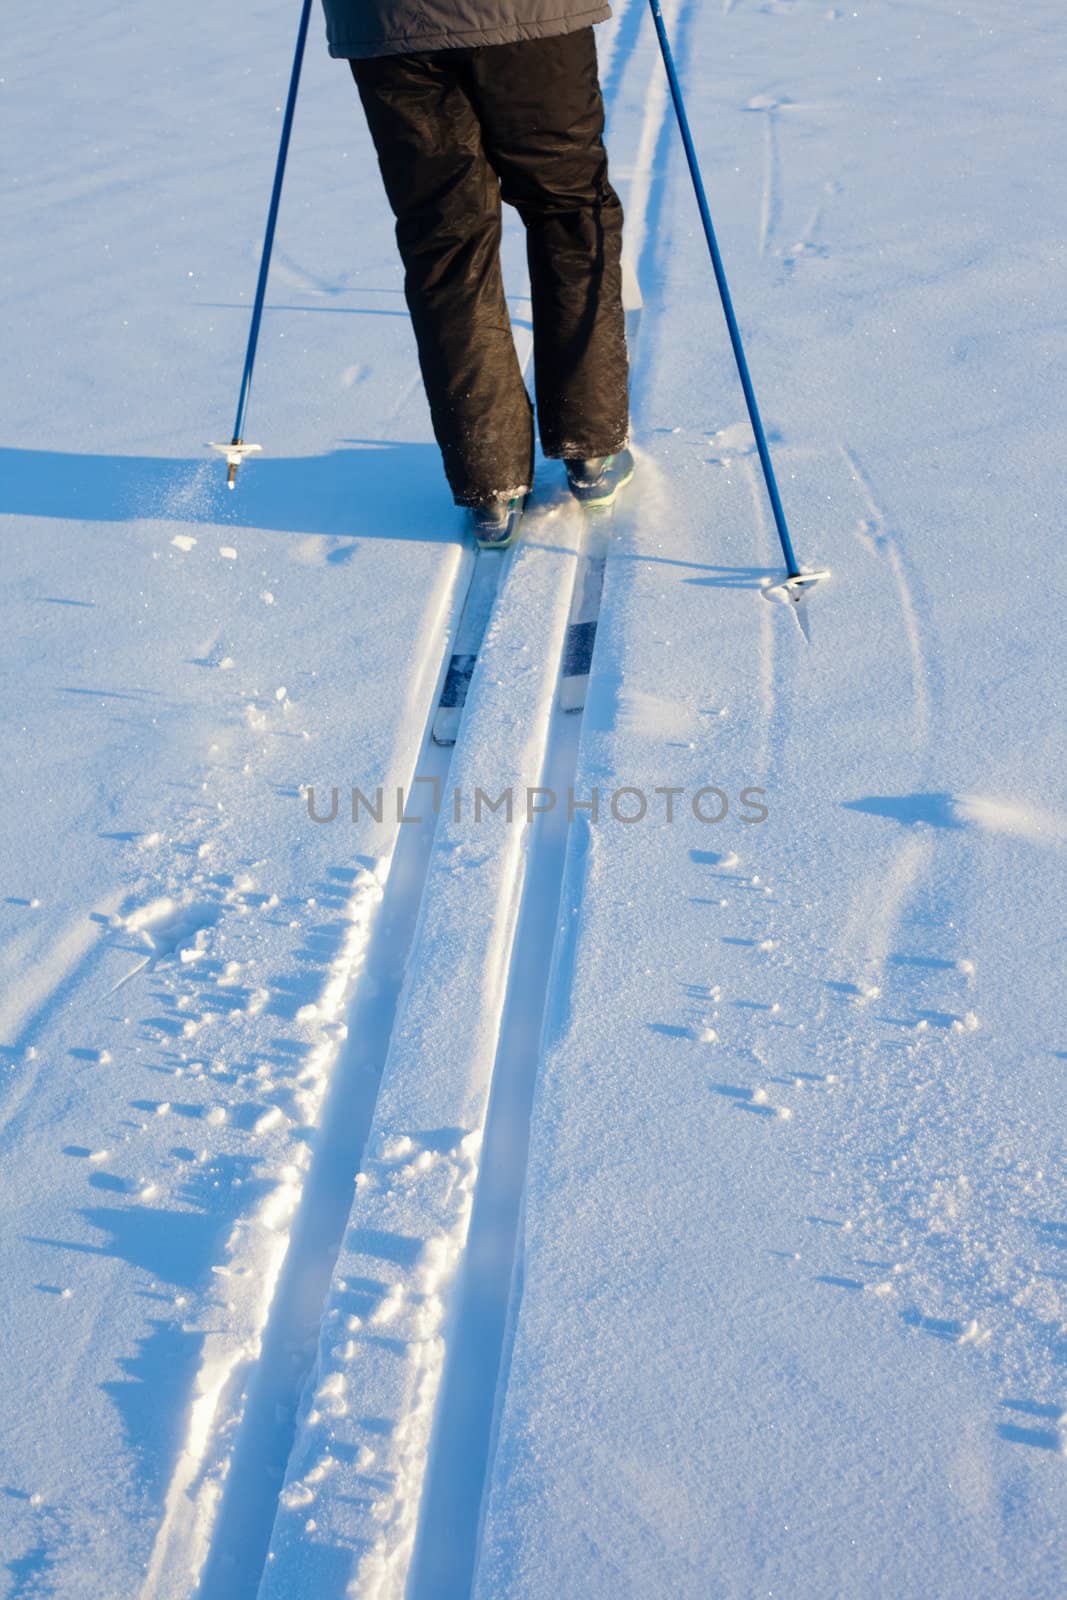 Beautiful cold winter day takes cross-country skiing person out having fun in ski tracks.